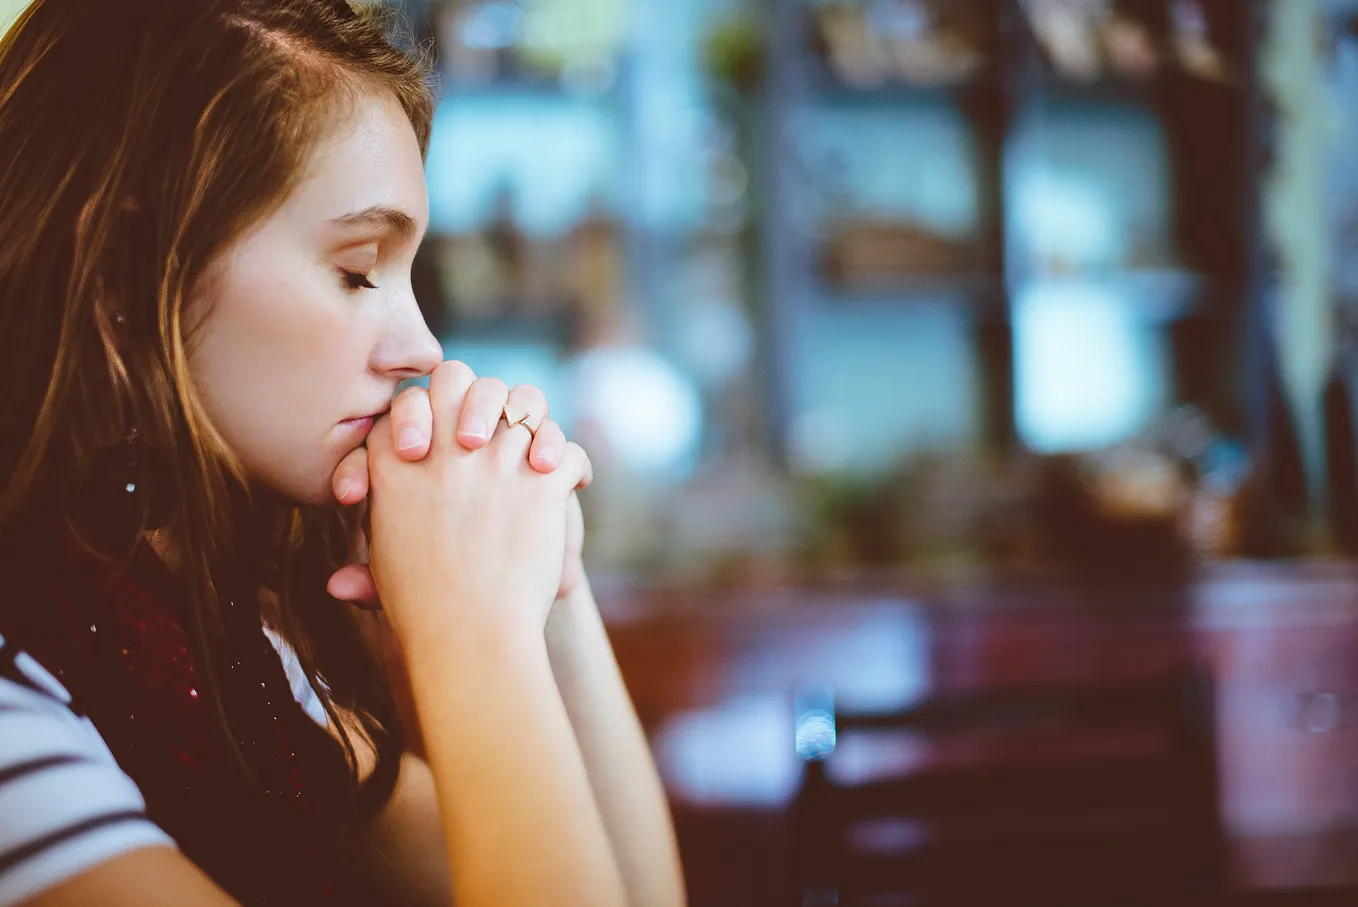 A young woman is praying with her fingers woven together and in front of her mouth. Her elbows seem to be on the altar.